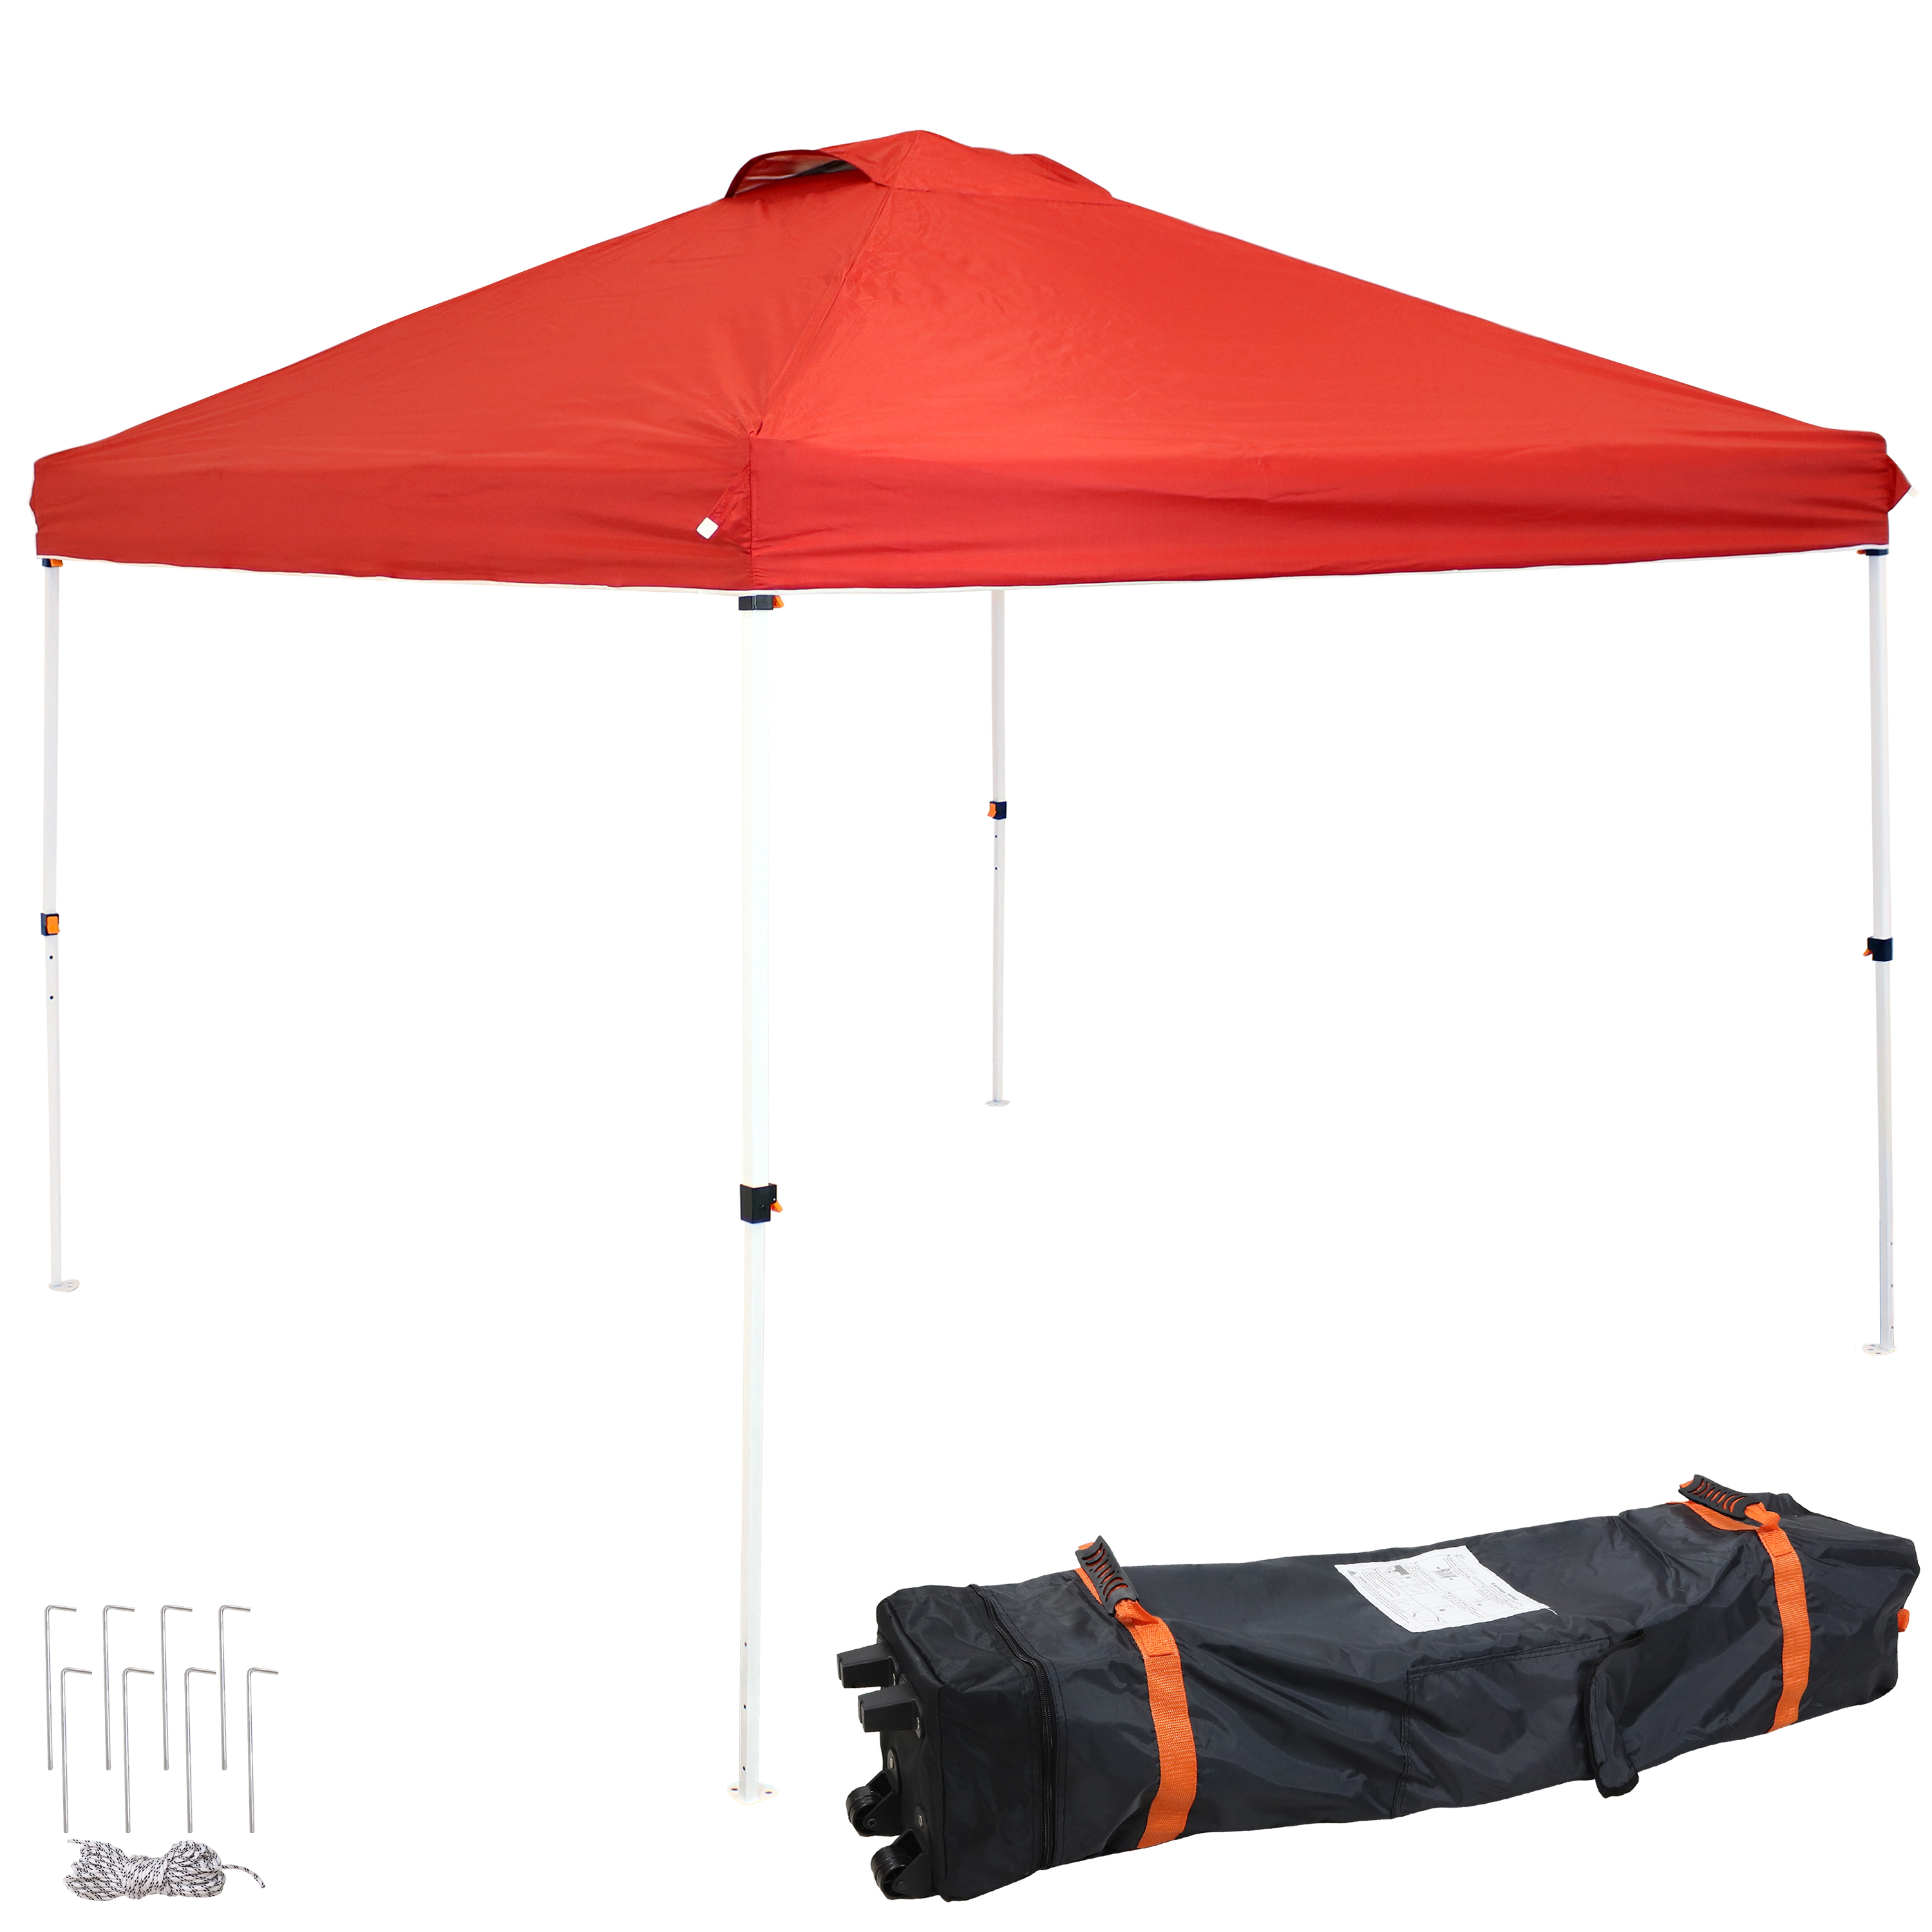 Premium Pop-Up Canopy with Rolling Bag - 12 ft x 12 ft - Red